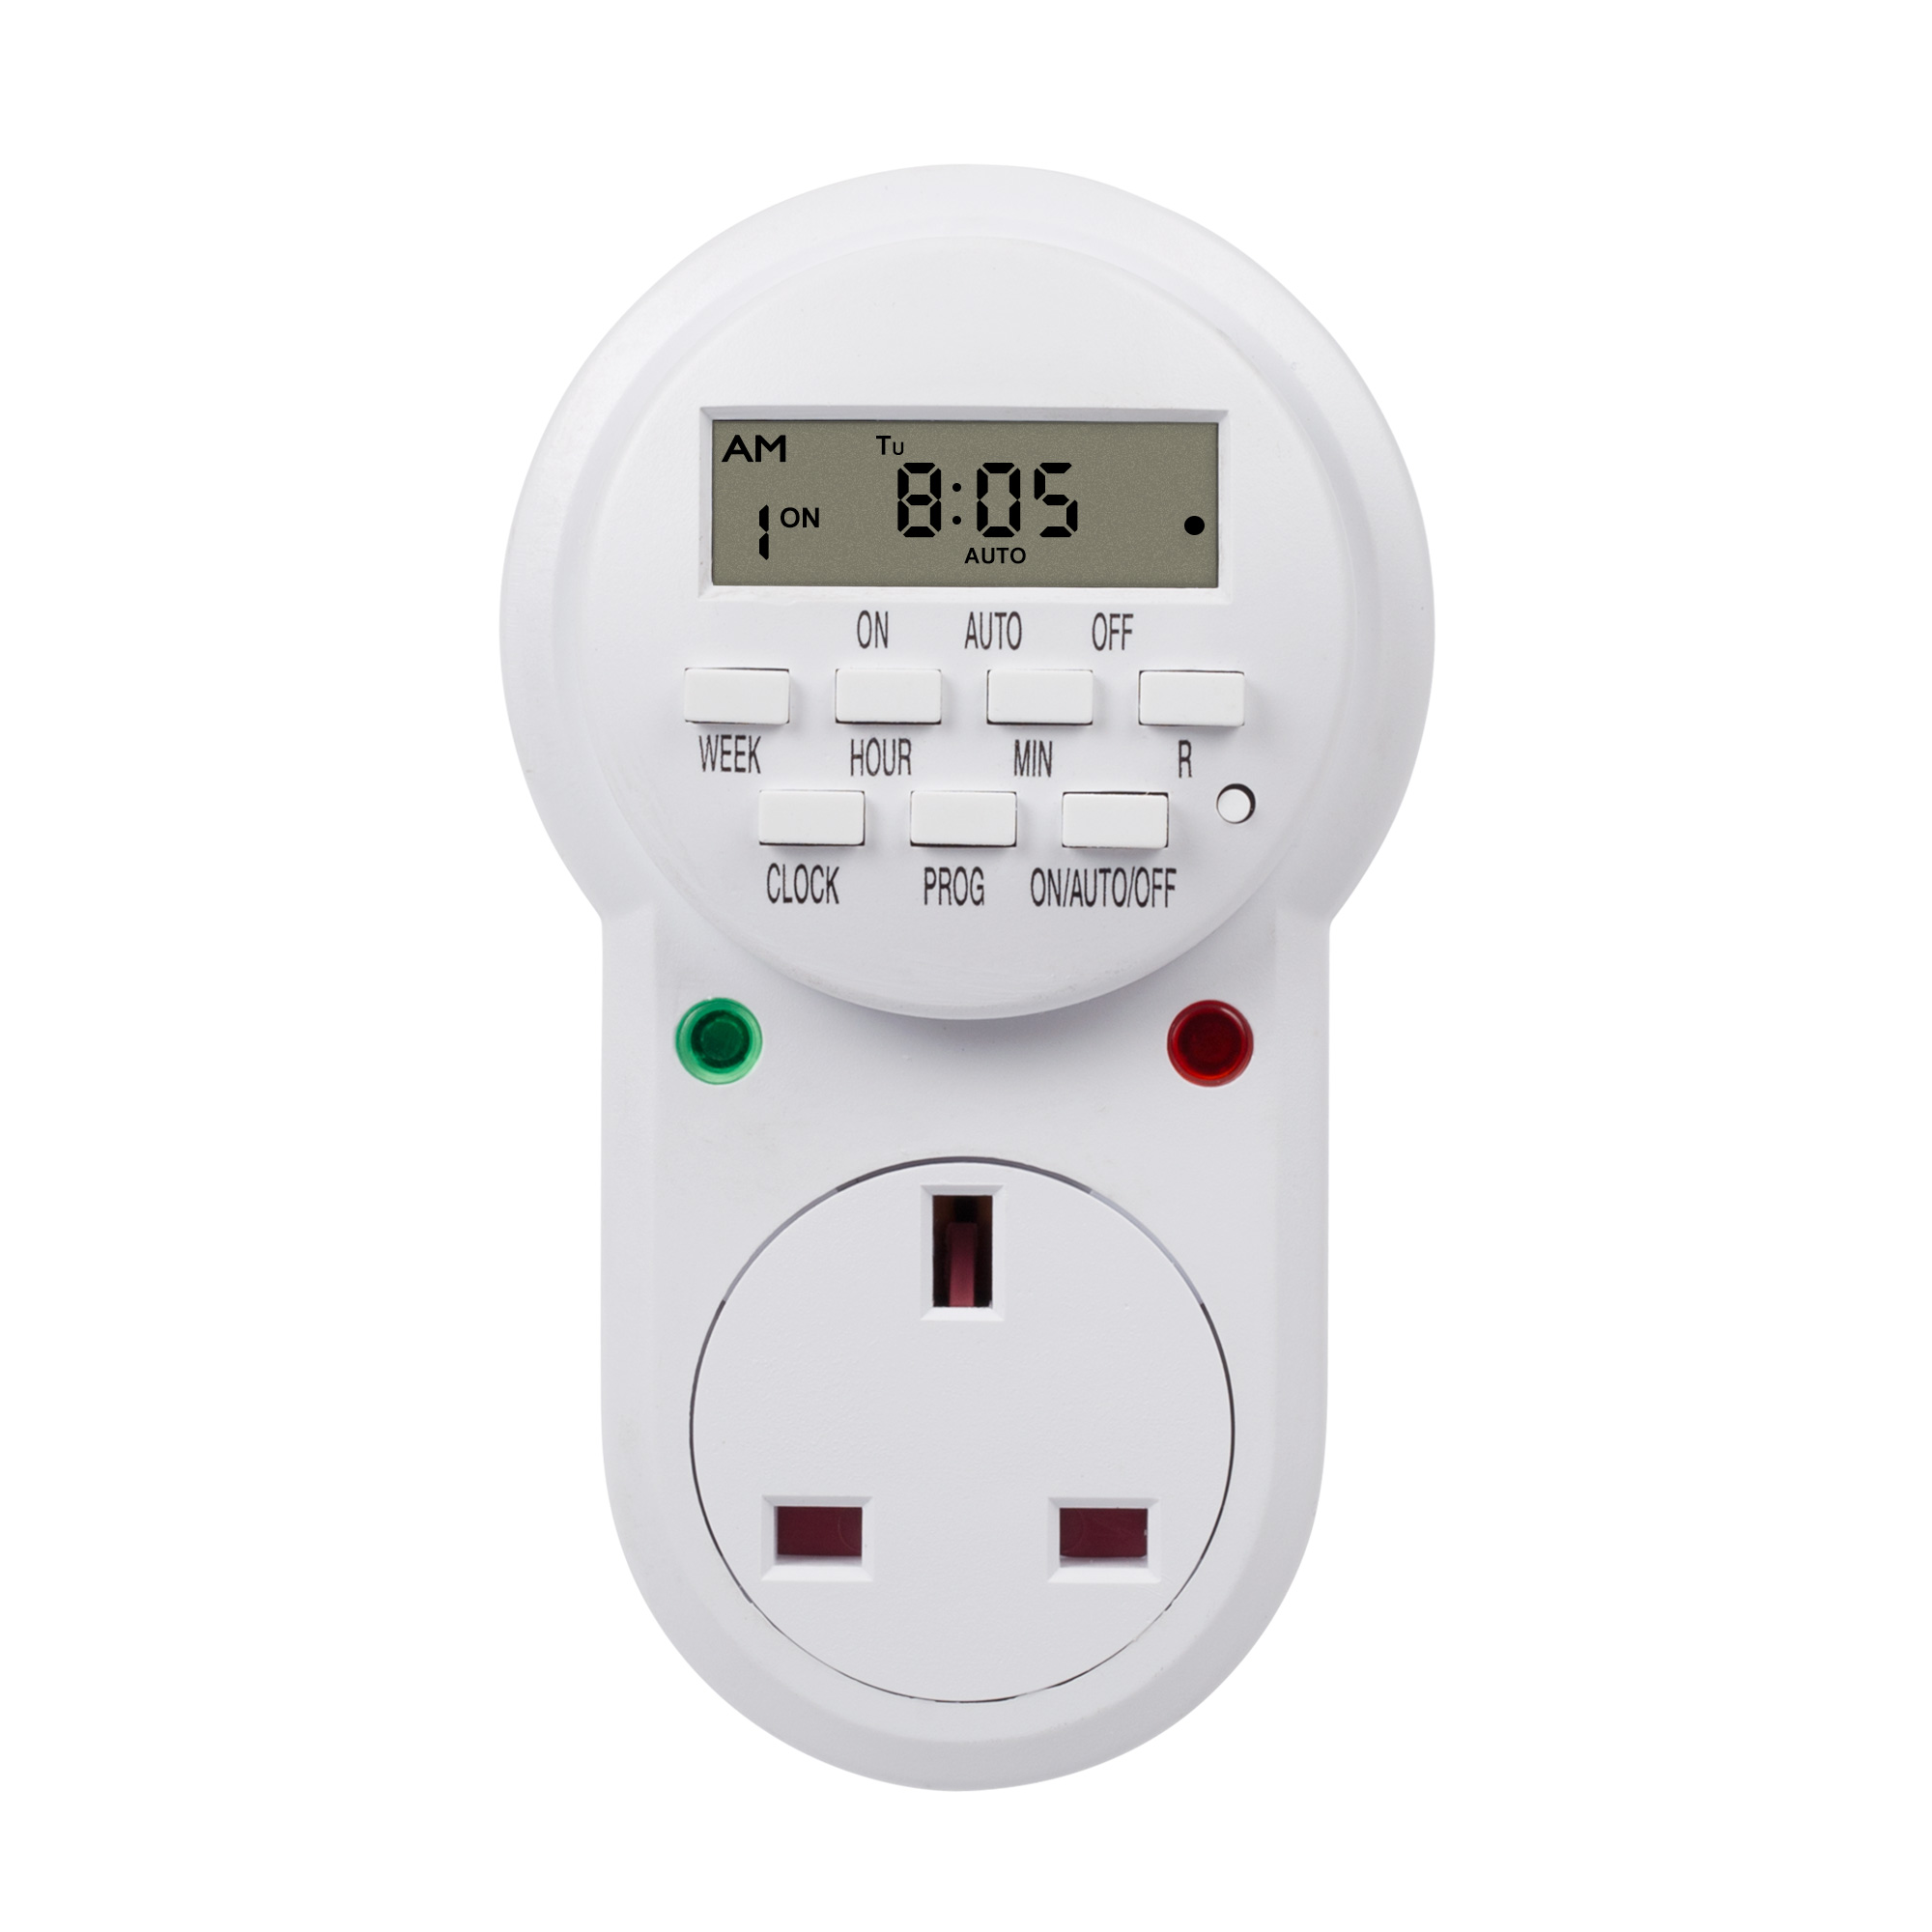 HBN Programmable Electronic Plug-in Timer Plug with LCD Display 24 Hours, 1 Pack